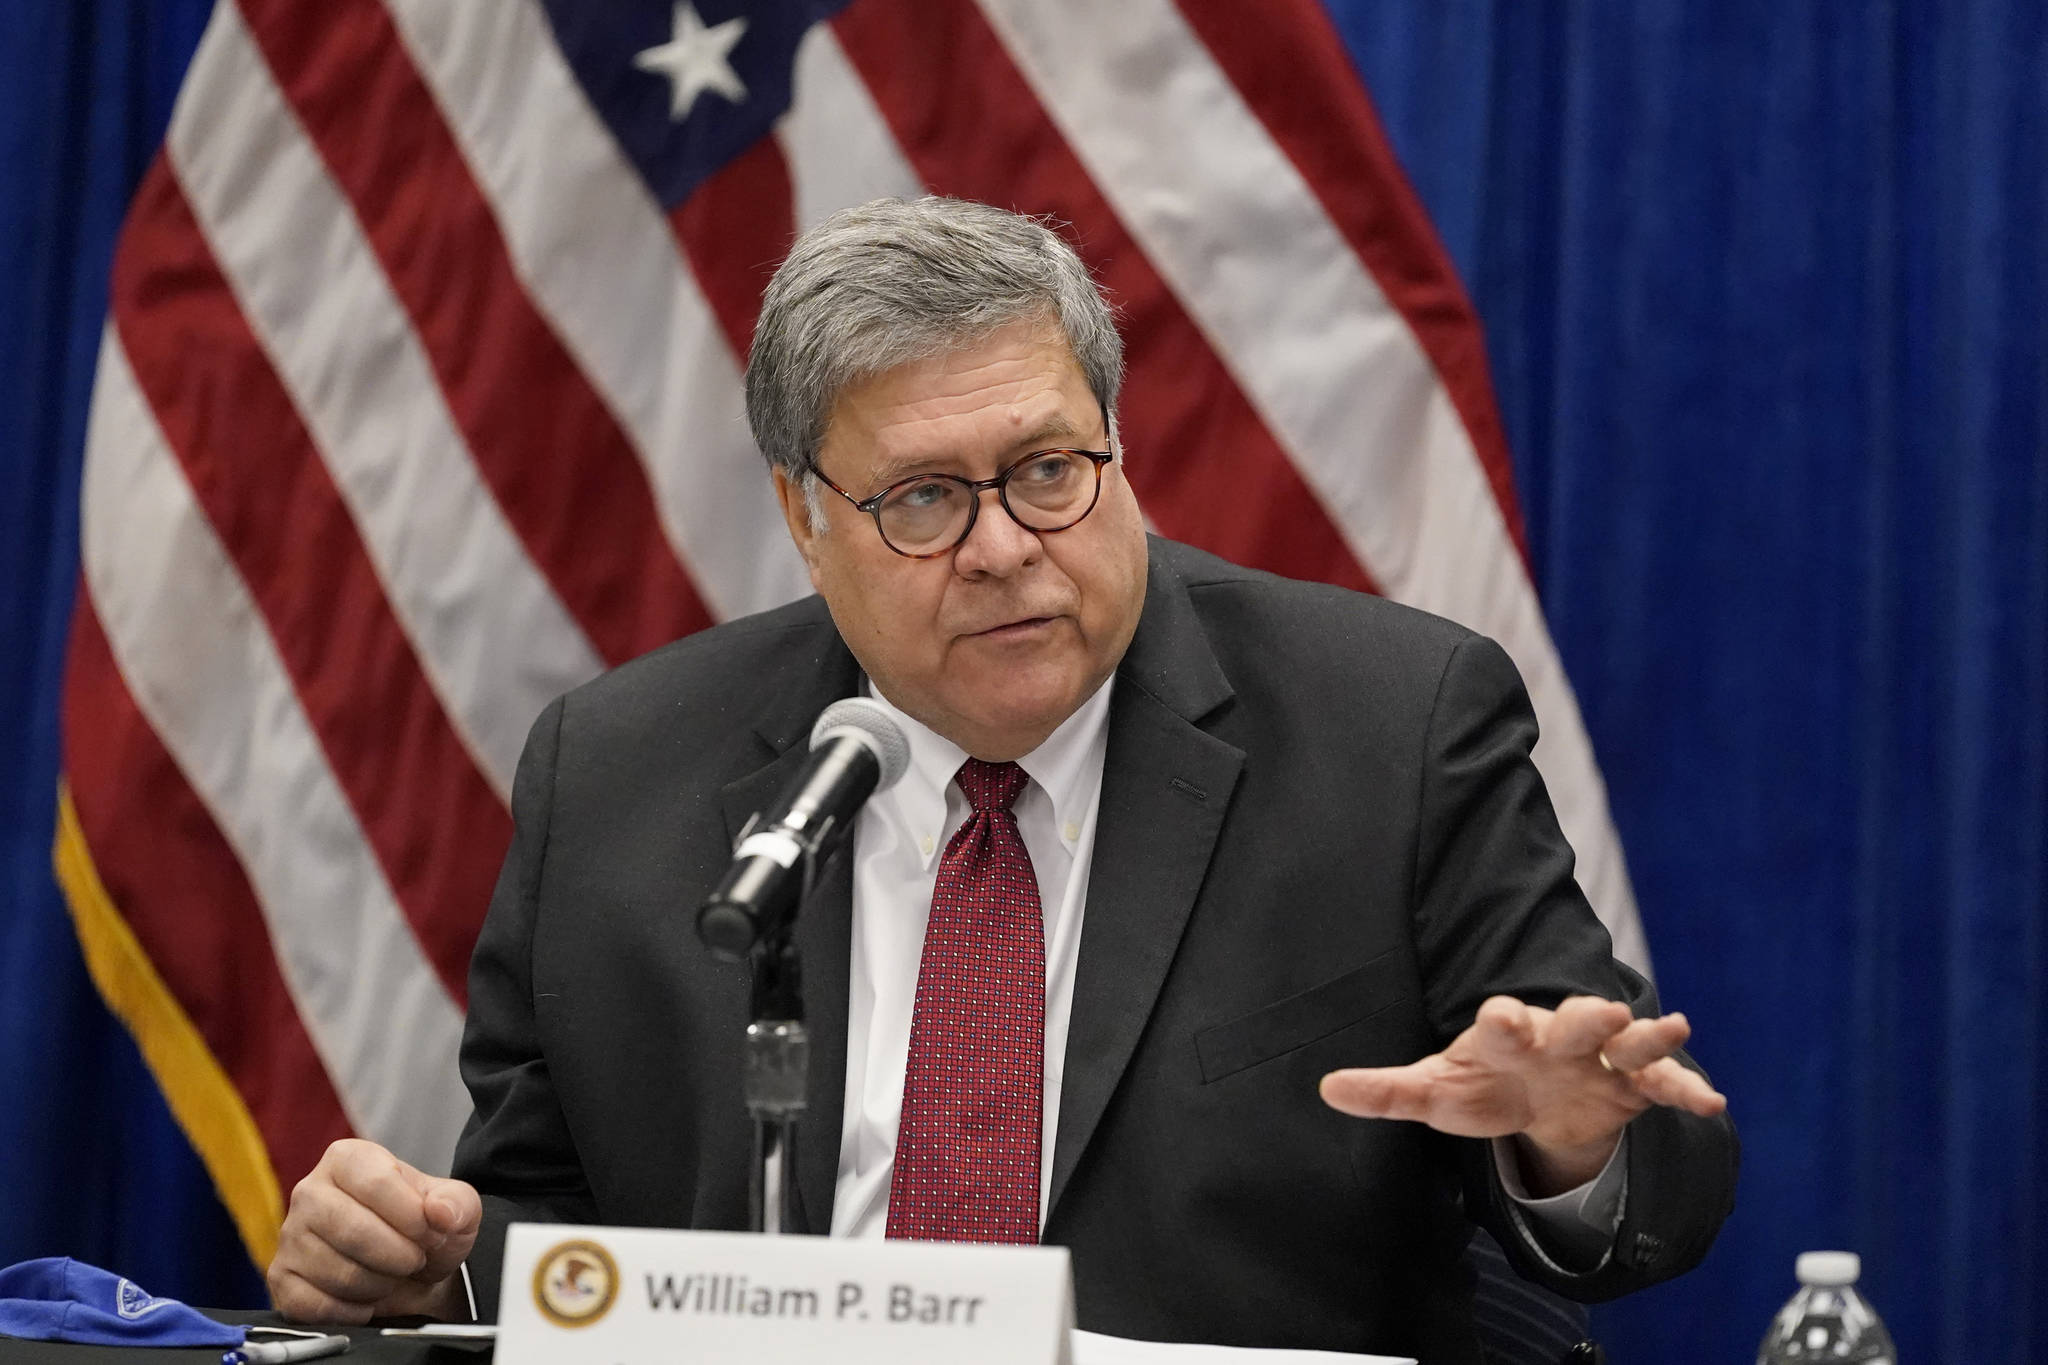 U.S.Attorney General William Barr speaks during a roundtable discussion on Operation Legend, a federal program to help cities combat violent crime, Thursday, Oct. 15, 2020, in St. Louis. Barr also spoke via recorded message at the annual Alaska Federation of Natives Convention. (AP Photo / Jeff Roberson)